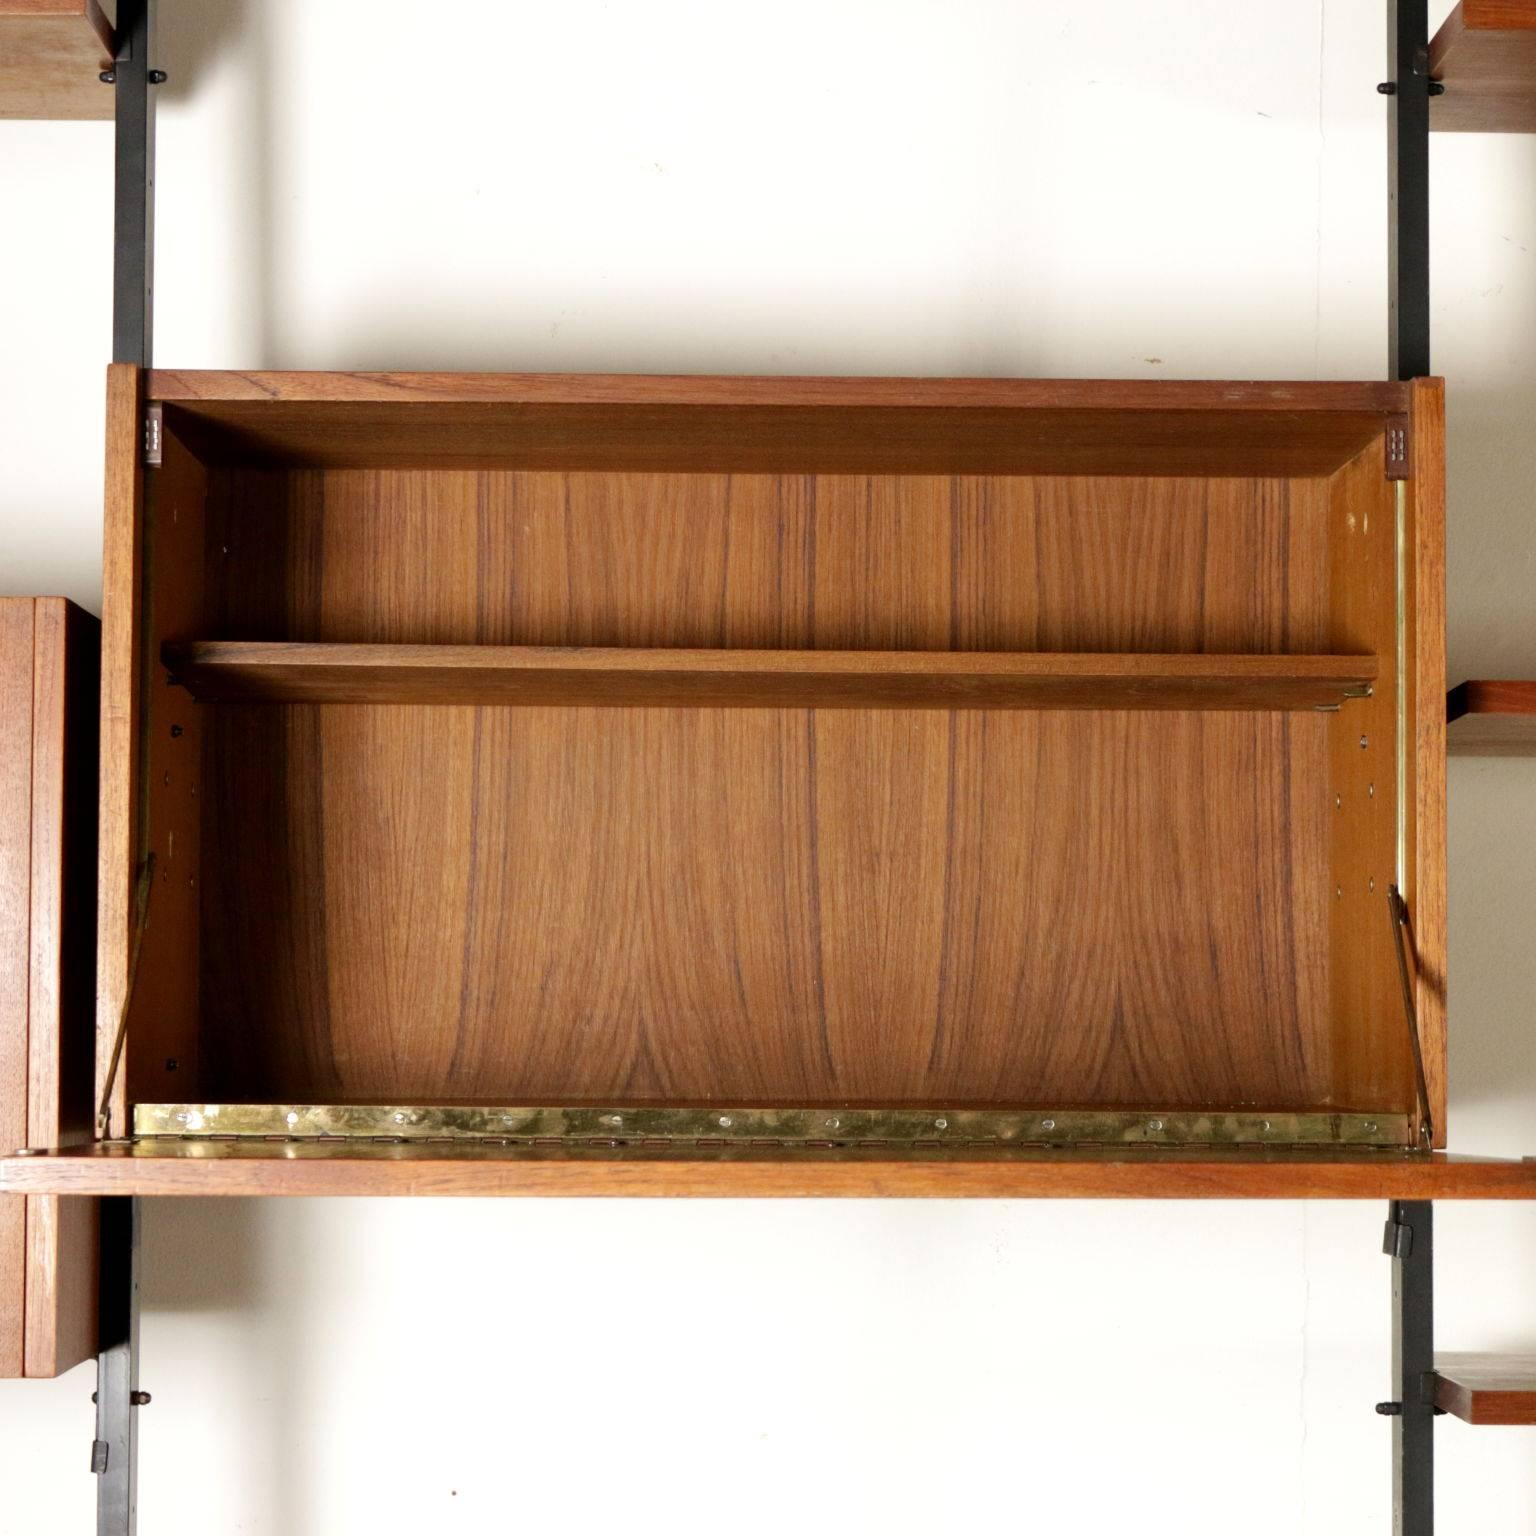 Bookcase Designed by Paolo Tilche Teak Veneer Vintage, Italy, 1950s-1960s 4